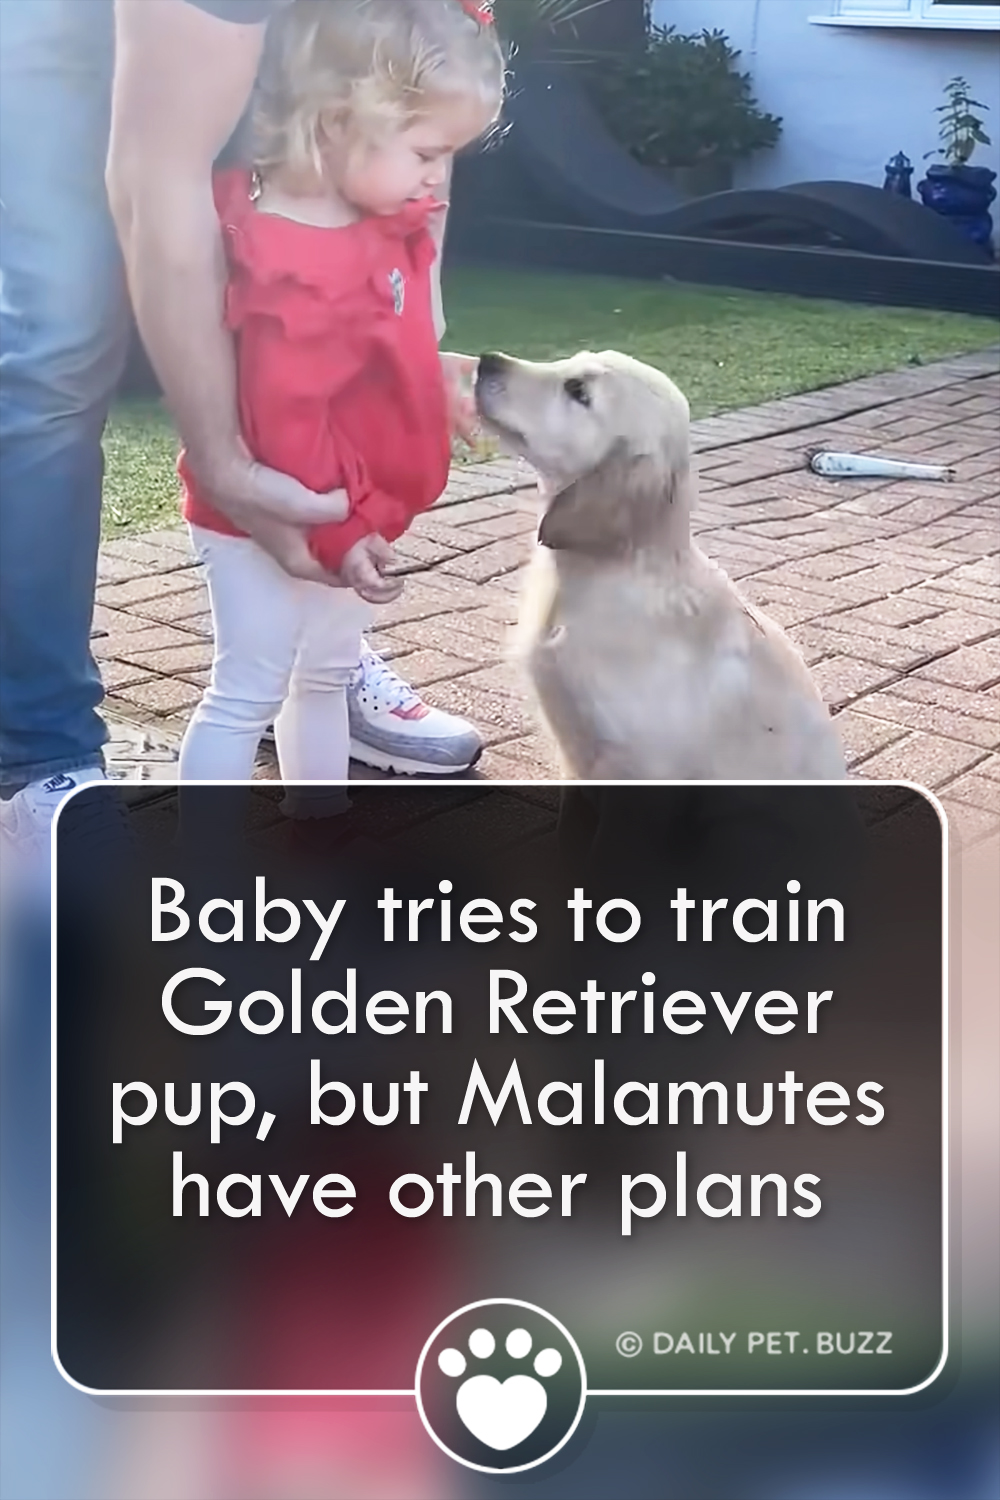 Baby tries to train Golden Retriever pup, but Malamutes have other plans